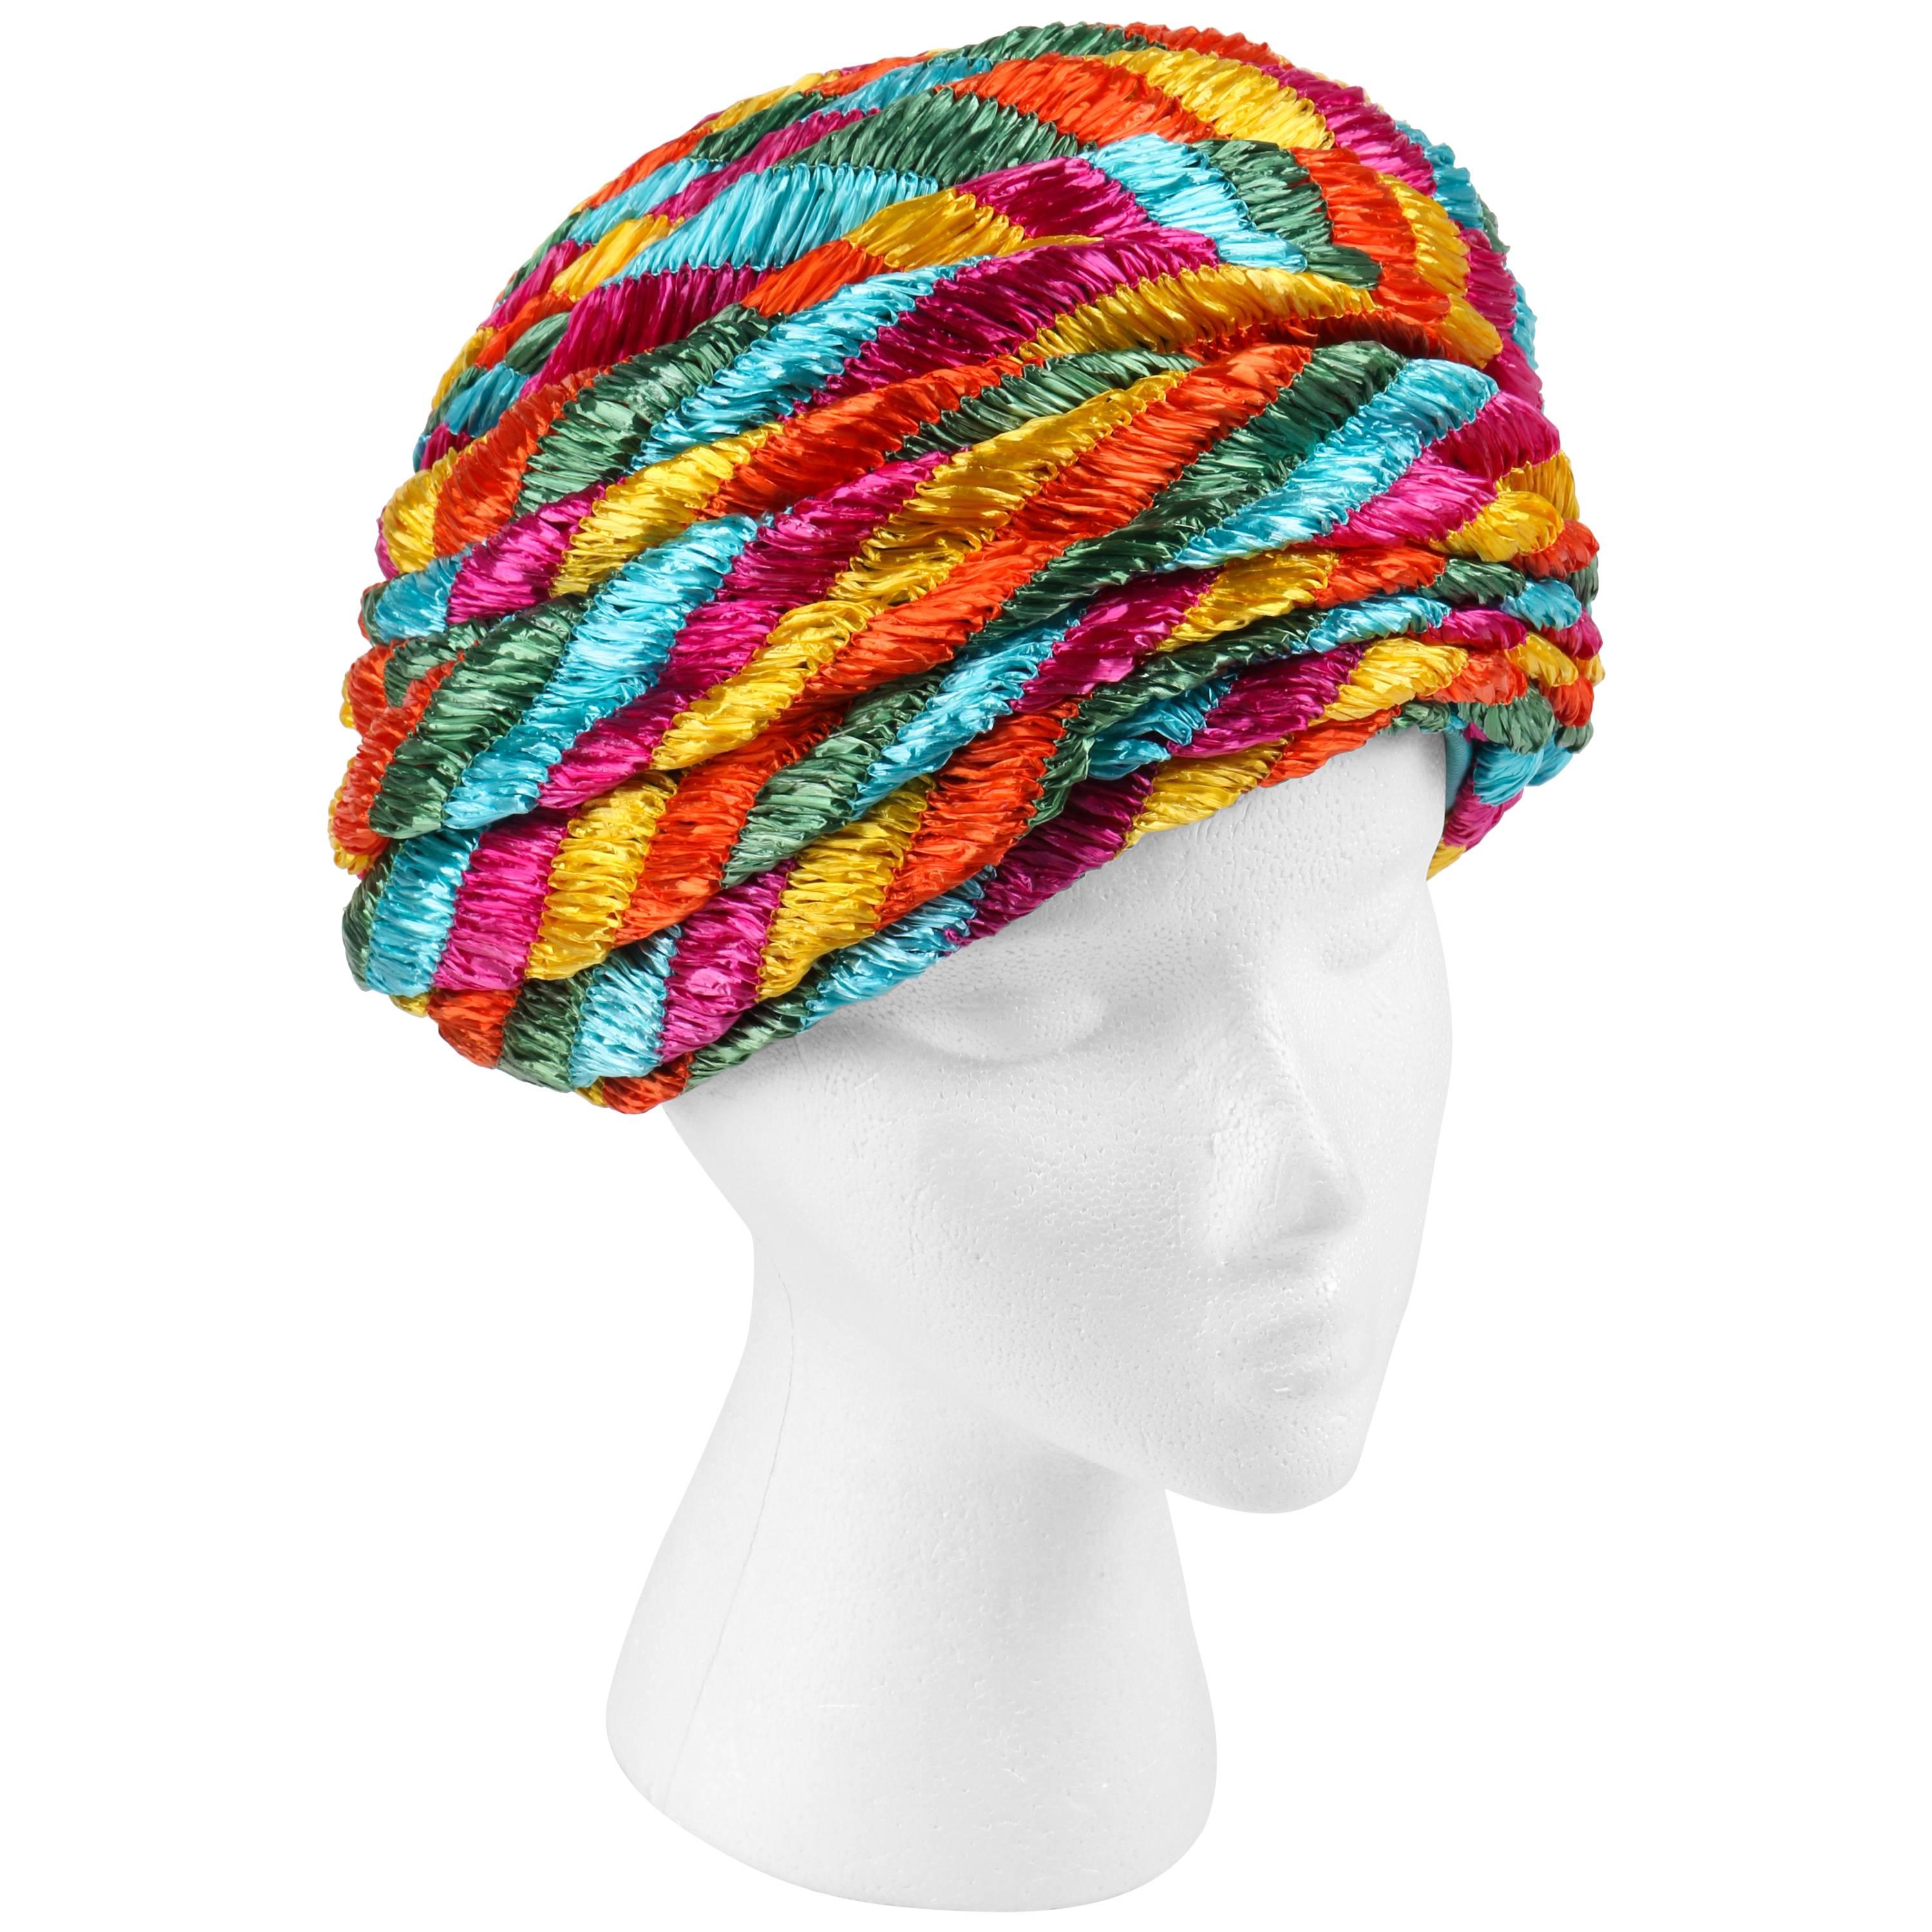 CHRISTIAN DIOR Chapeaux c.1960's Multicolor Straw Pleated Beehive Turban Hat